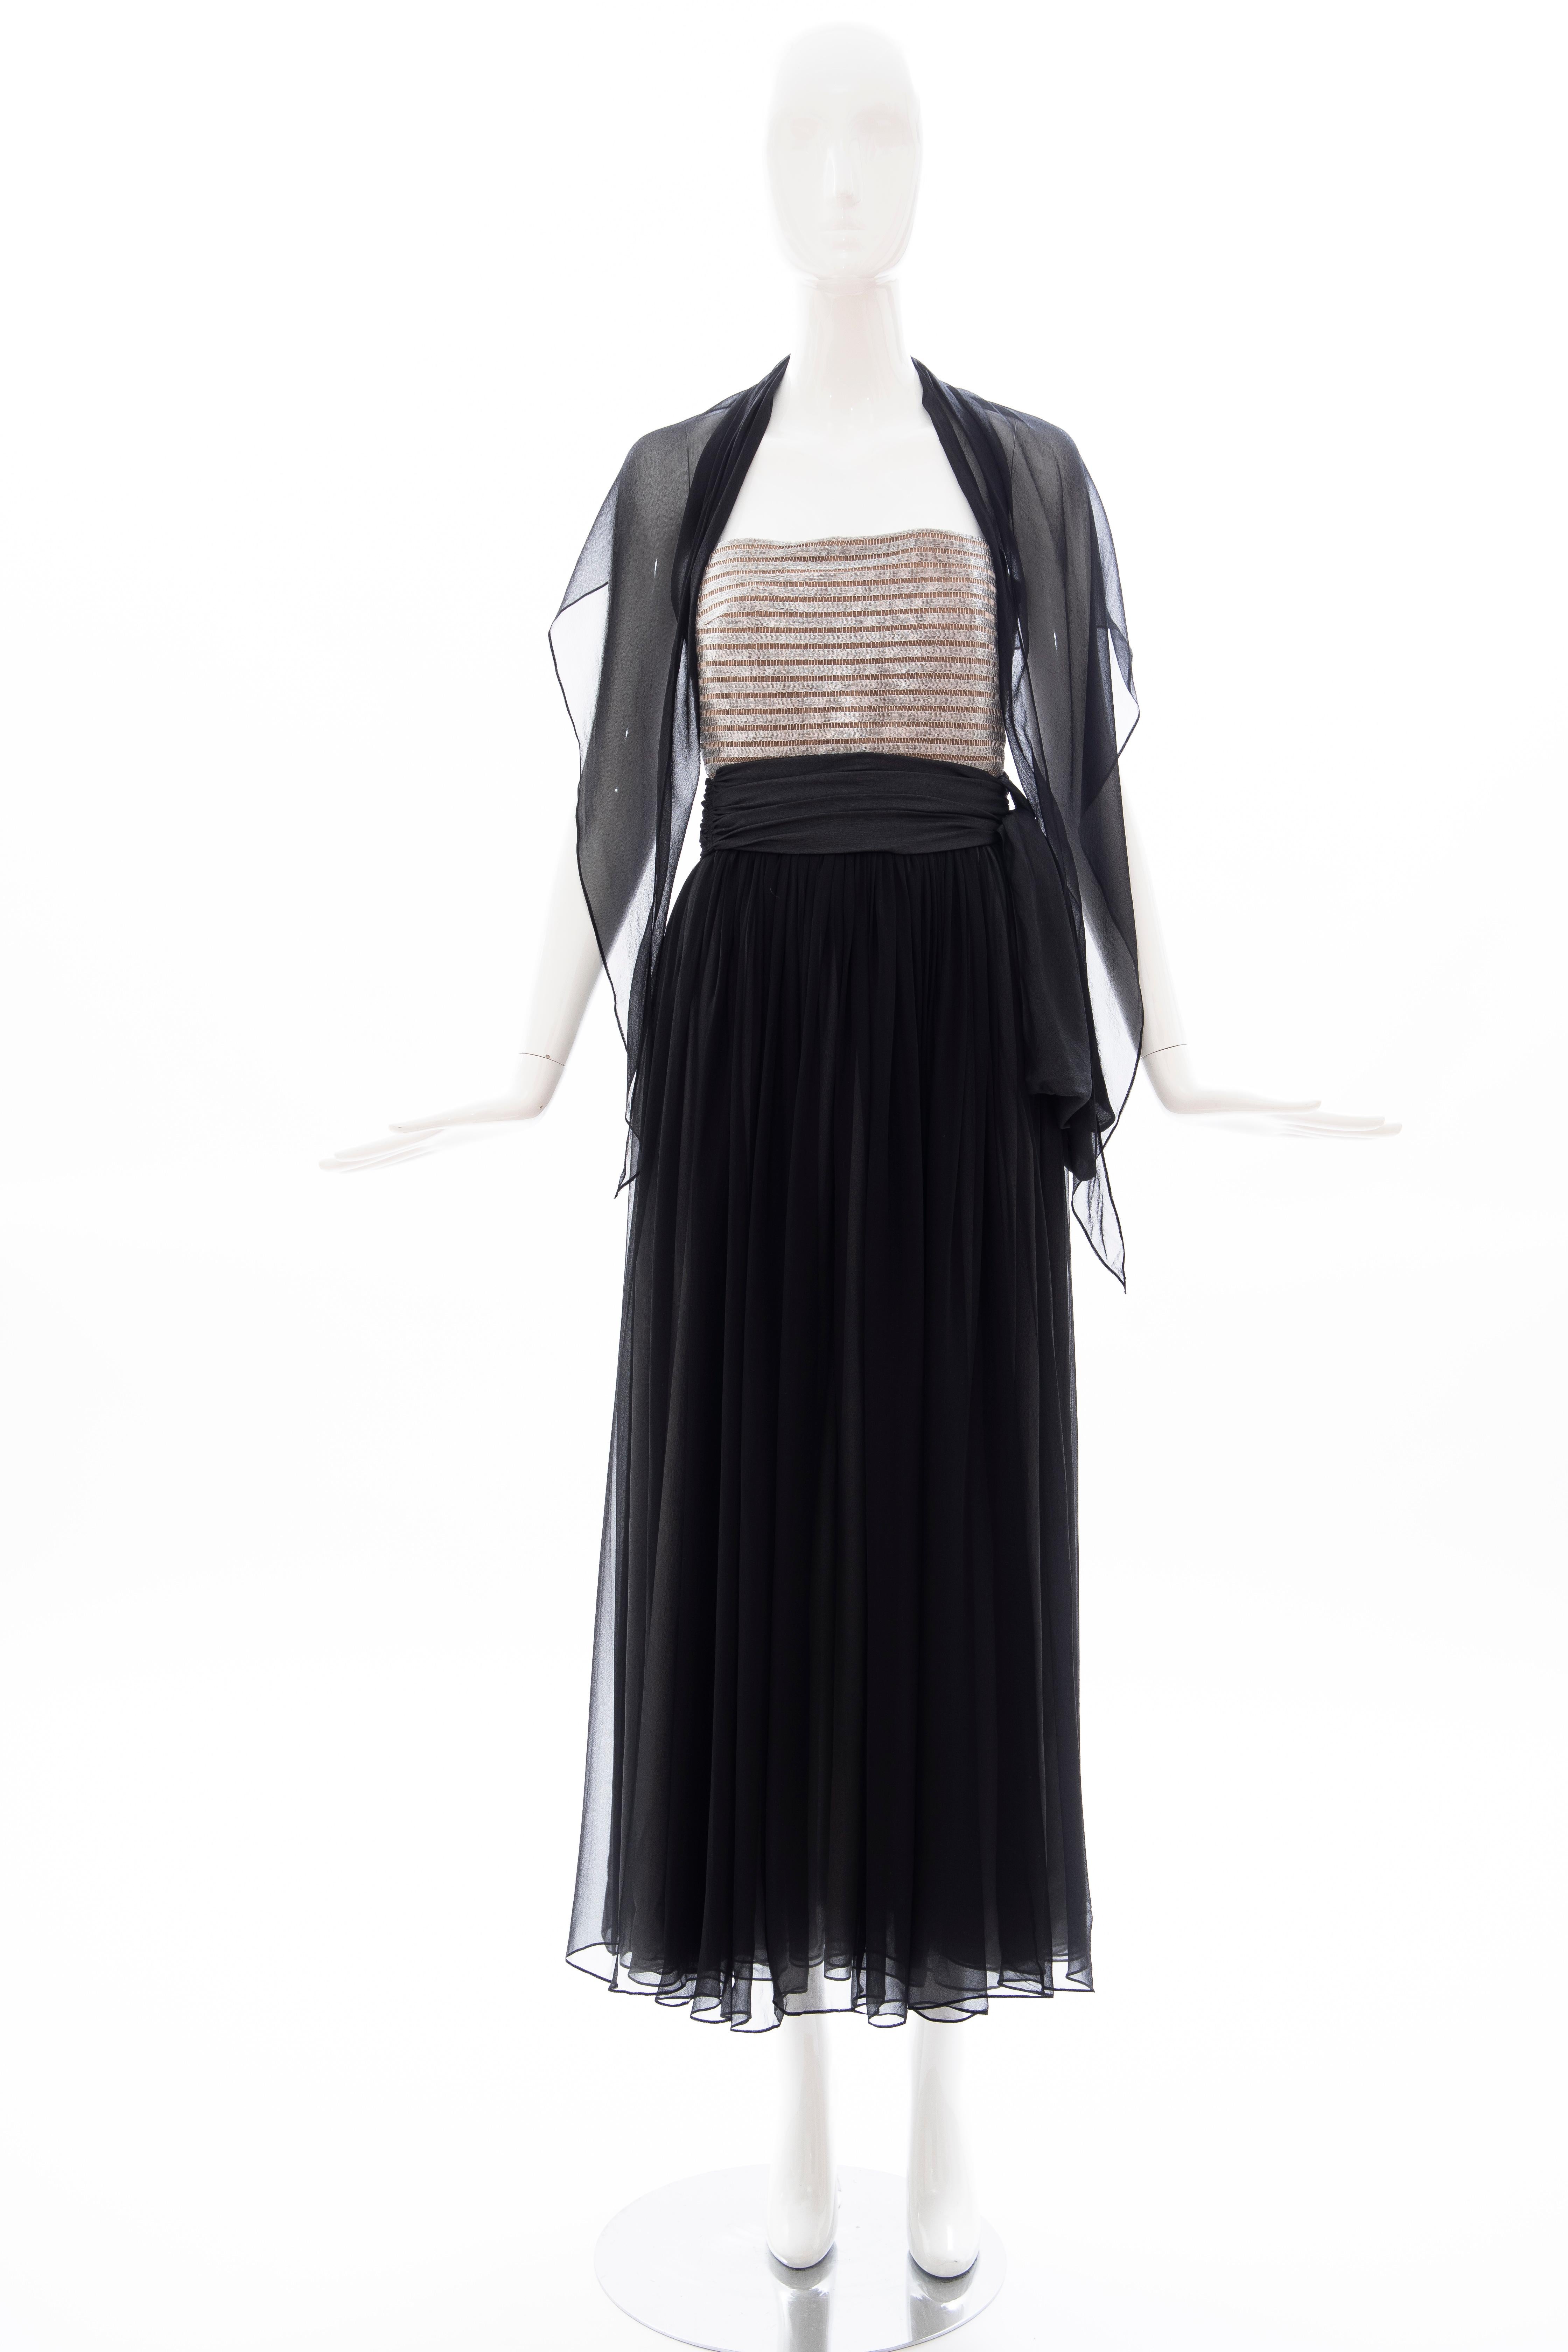 Calvin Klein Collection Runway Spring 1989, black strapless silk chiffon evening dress with striped silver metallic bust with side concealed zip and hook-and-eye closure and fully lined in silk chiffon.

No Size Label
Bust: 28